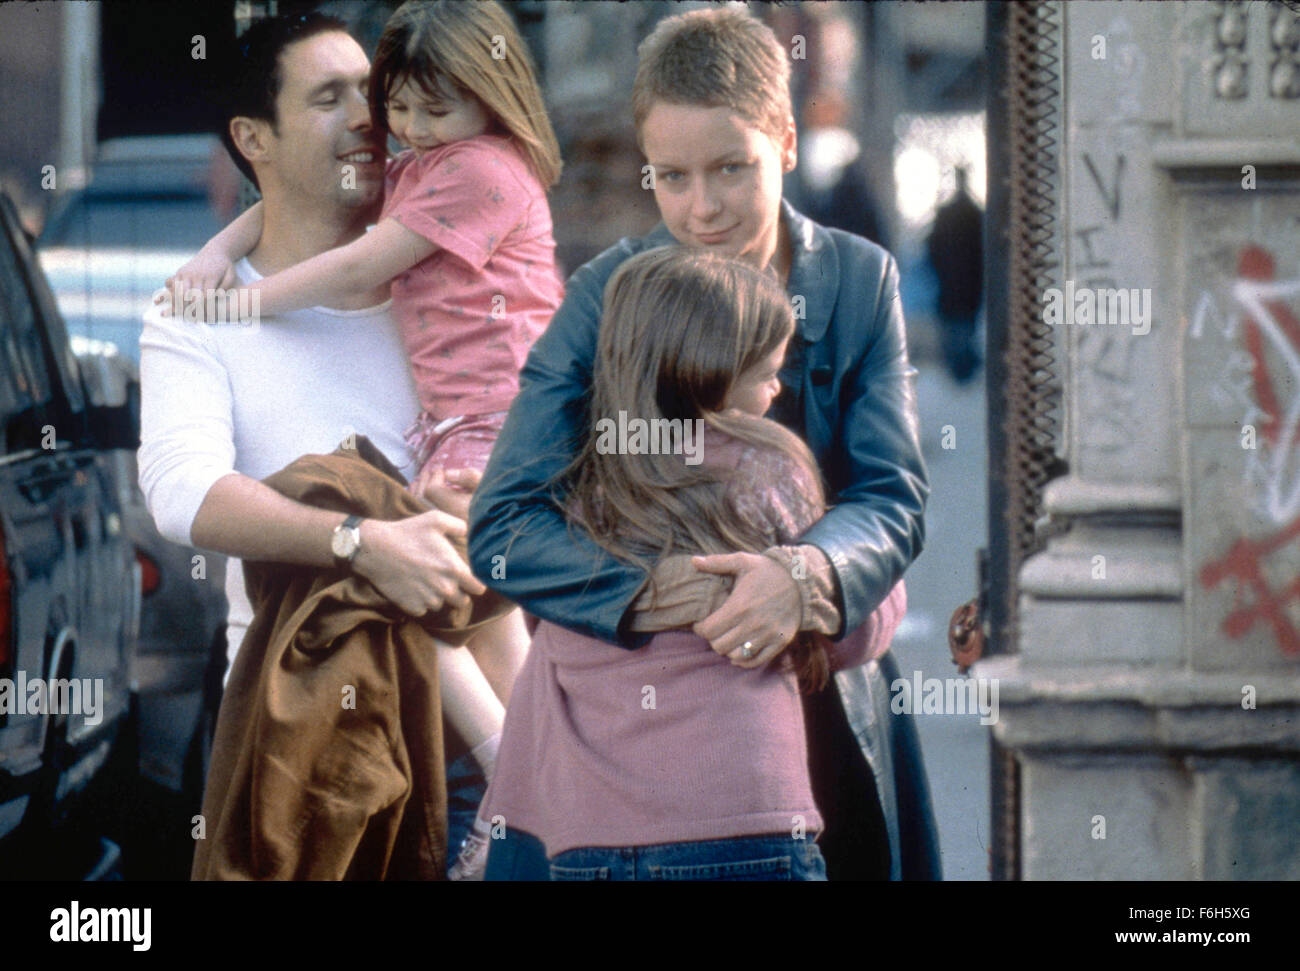 May 14, 2002; London, UK; Actors PADDY CONSIDINE as Johnny, EMMA BOLGER as Ariel, SARAH BOLGER as Christy and SAMANTHA MORTON as Sarah star in the drama/ romance 'In America' directed by Jim Sheridan. An Irish immigrant family adjusts to life in the United States. Stock Photo